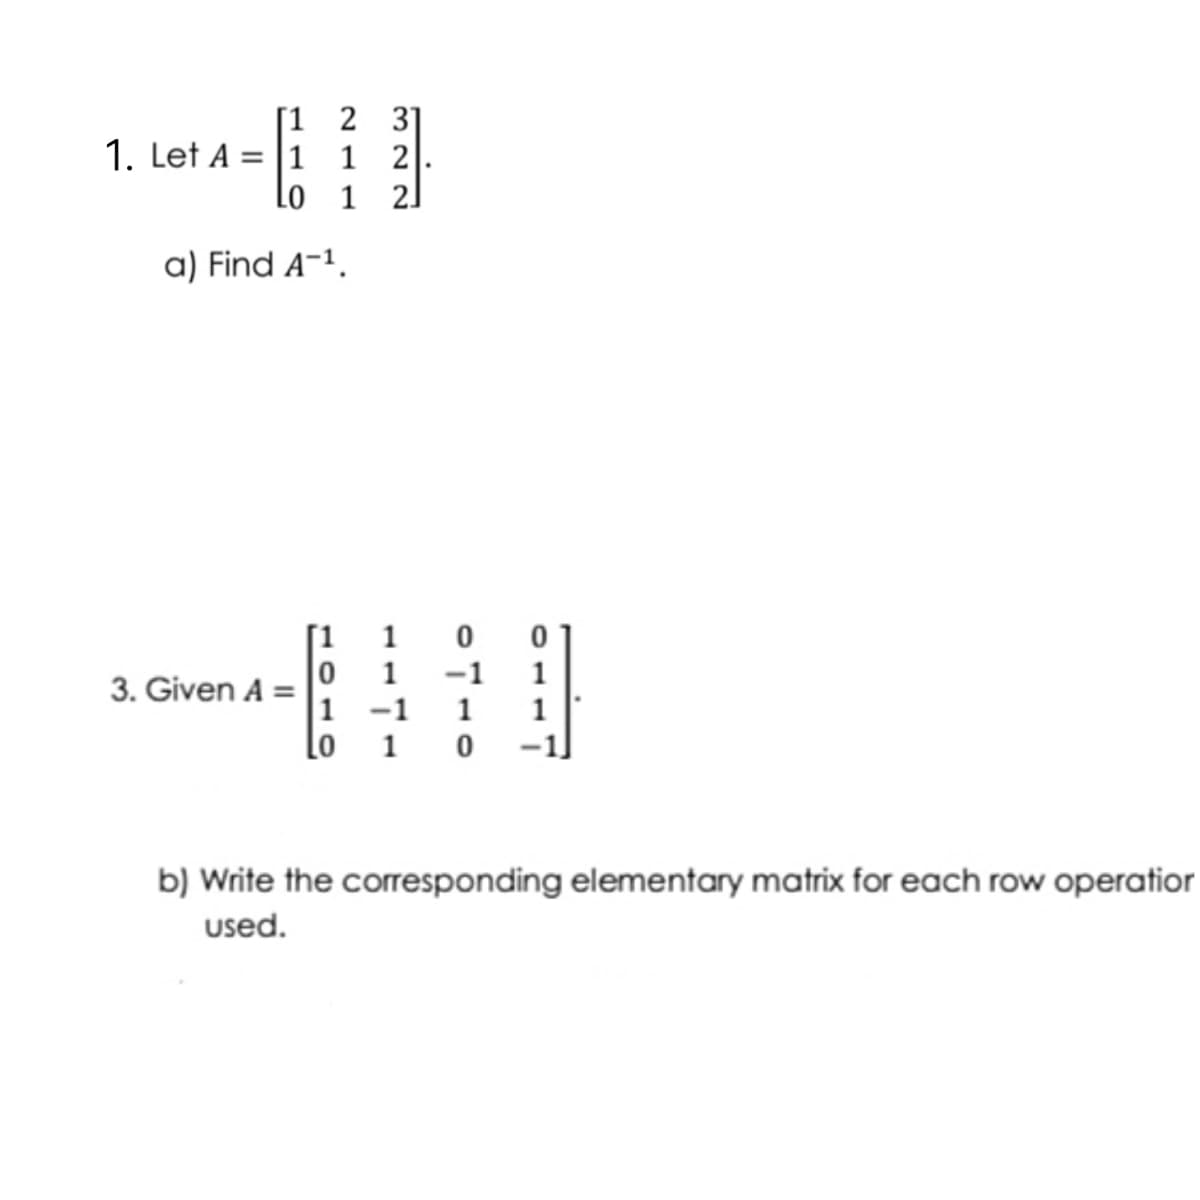 [1 2 31
1 2
Lo 1 2.
1. Let A = |1
a) Find A-1.
[1 1
1
-1
1
3. Given A =
|1 -1
Lo
1
1
1
b) Write the corresponding elementary matrix for each row operatior
used.
